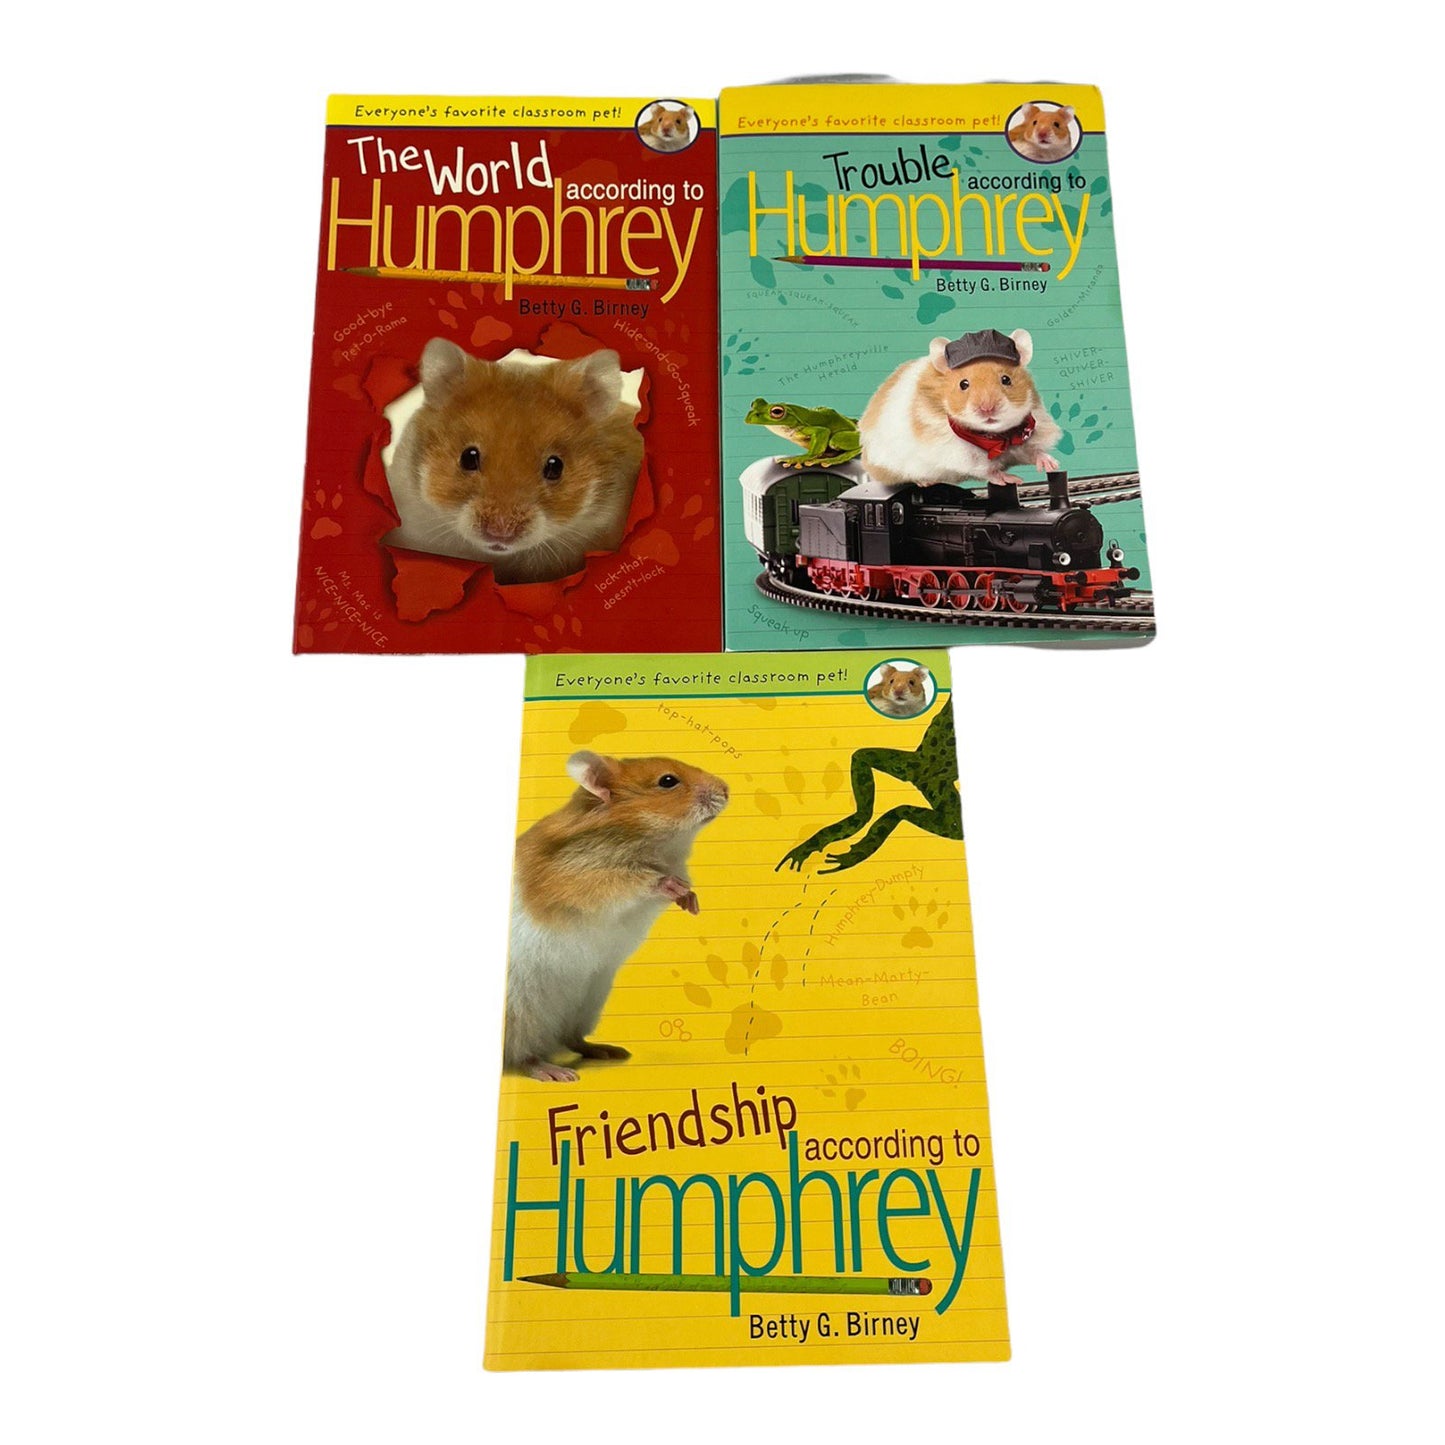 The Best Giftset Ever According to Humphrey 3 Book Lot with Shlipcover